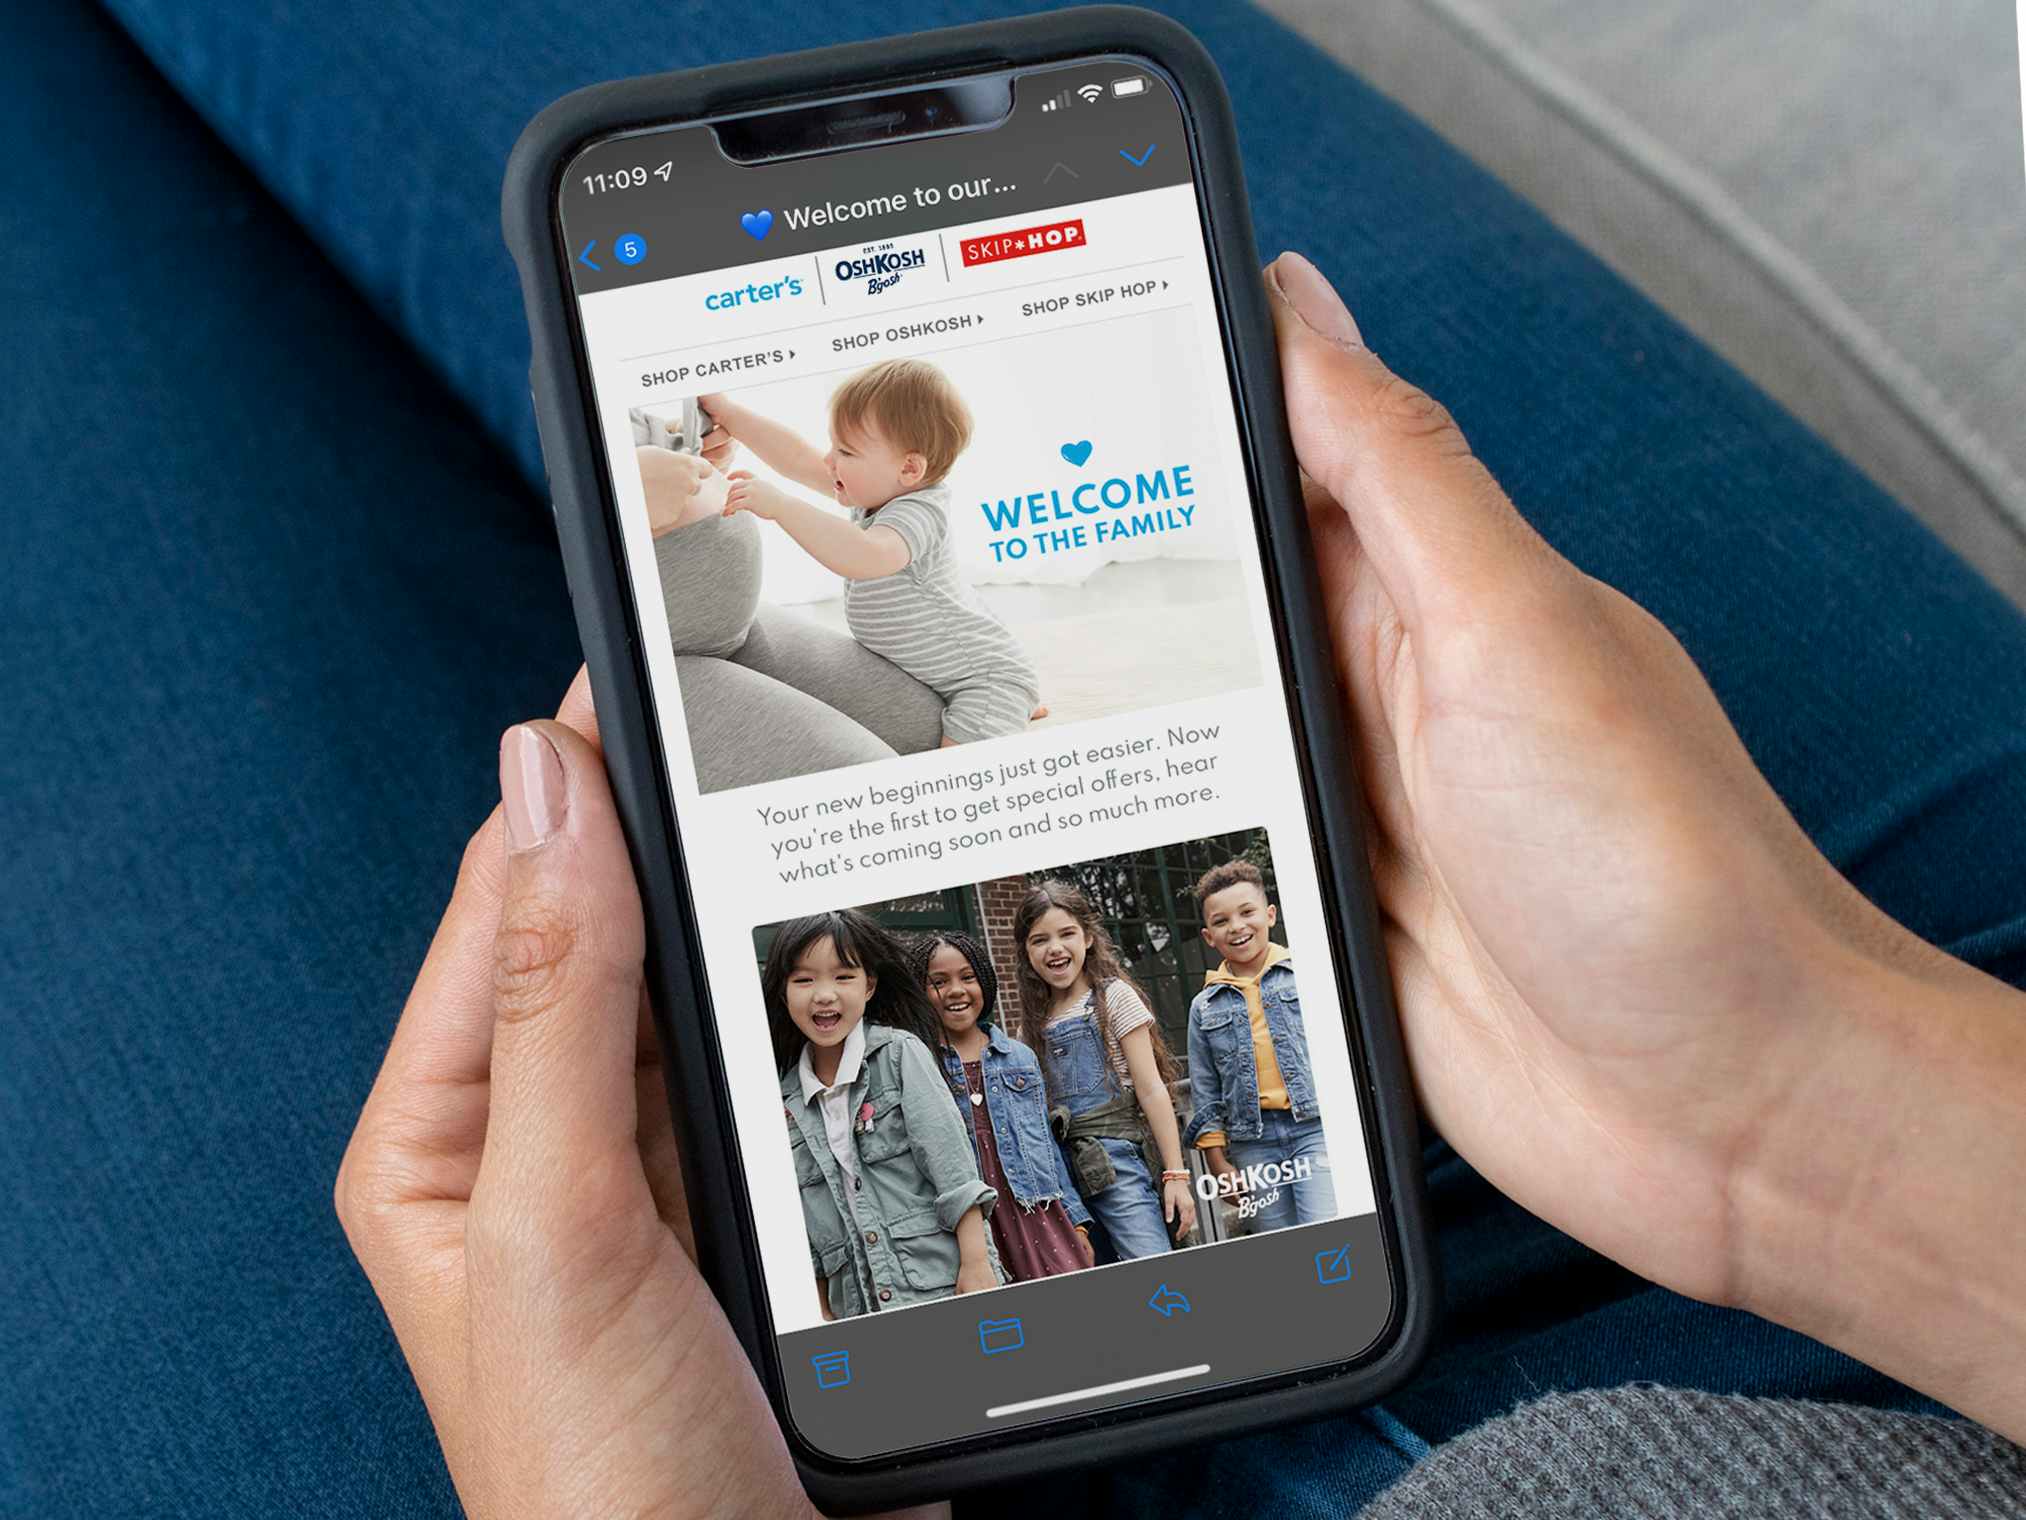 A person holding an iPhone displaying the Carter's "Welcome to the Family" email.